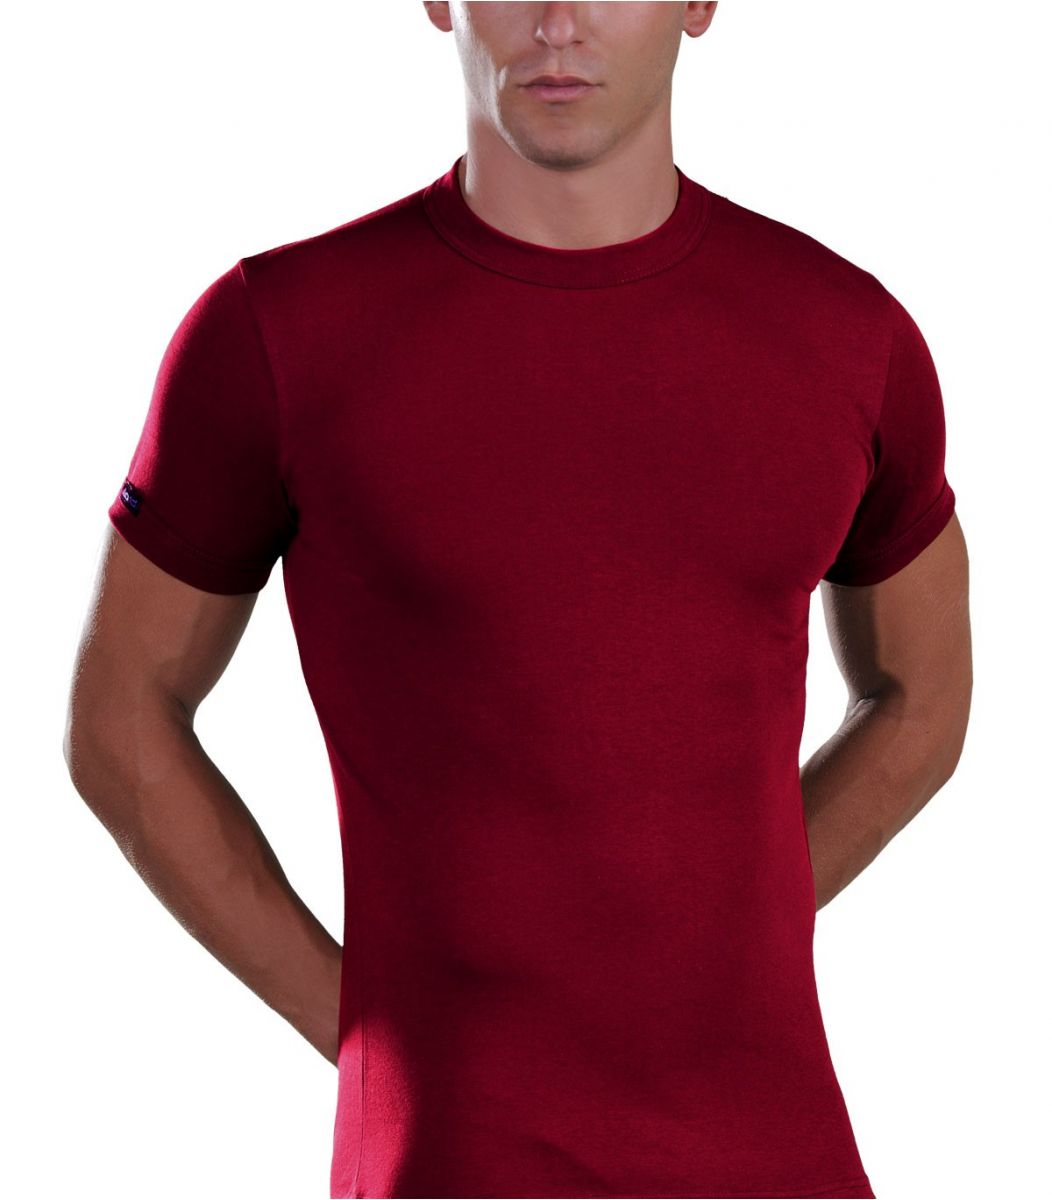  Crew neck Lord Offers T-shirt Viscose 380-3